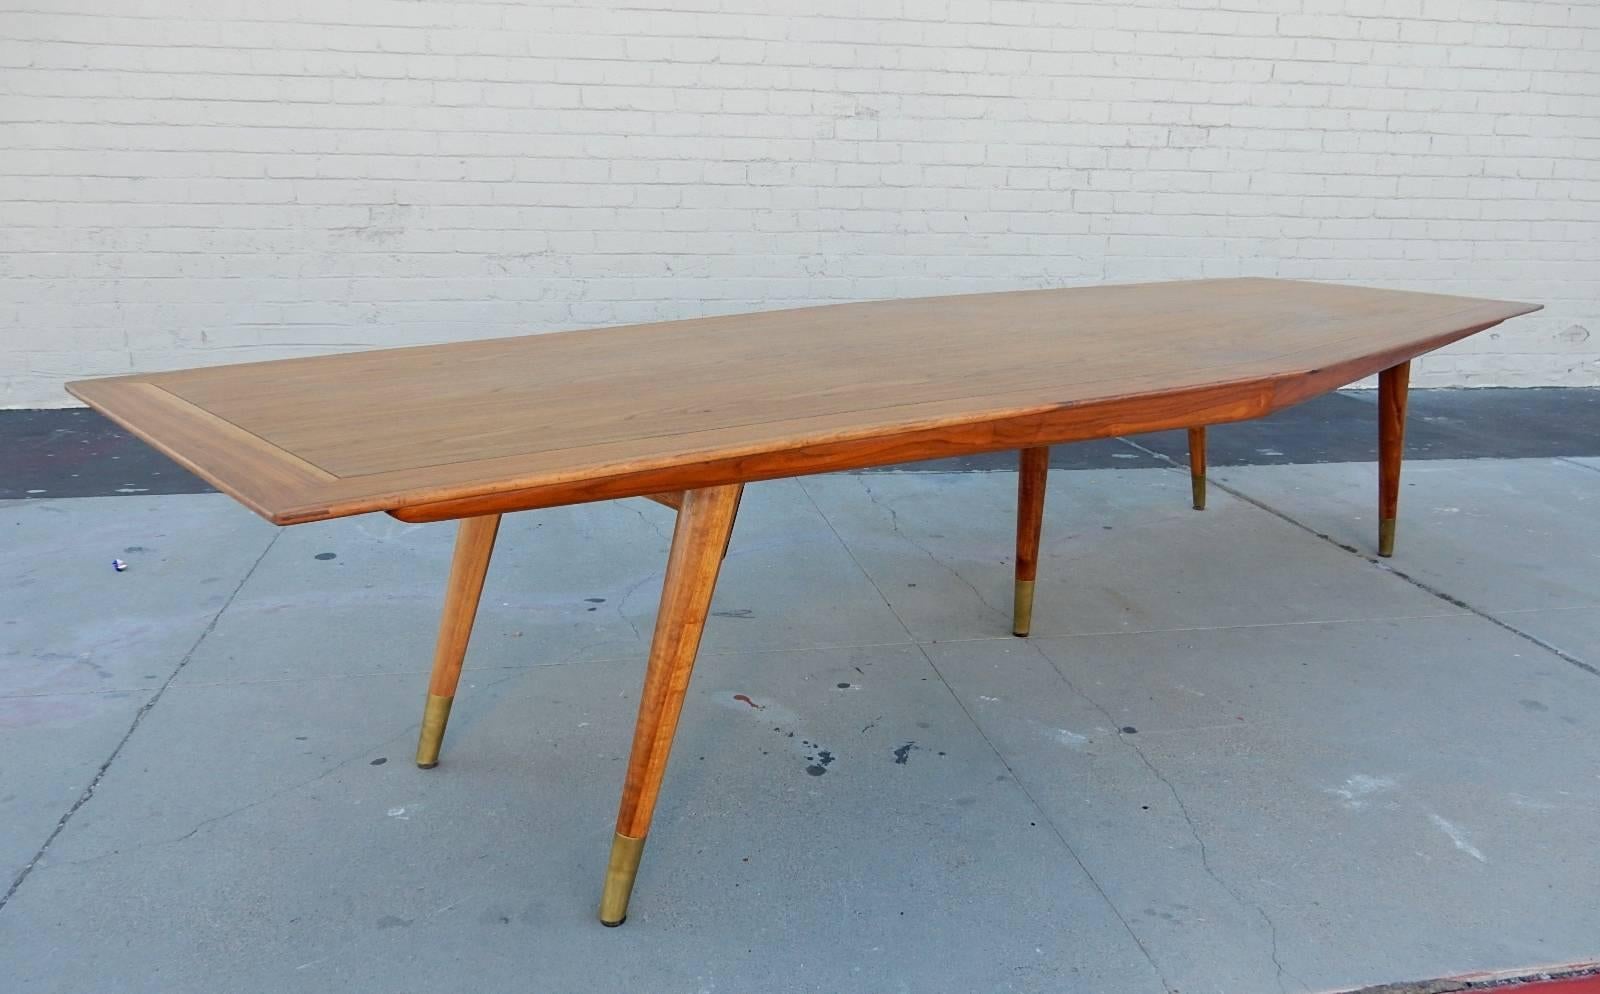 Enormous conference room table by Stow-Davis furniture. Designed by Giacomo Buzzitta, circa 1958.
Diamond shape walnut top and splay legs capped with brass feet.
Measures 12 feet long X 4.5 feet wide X 29